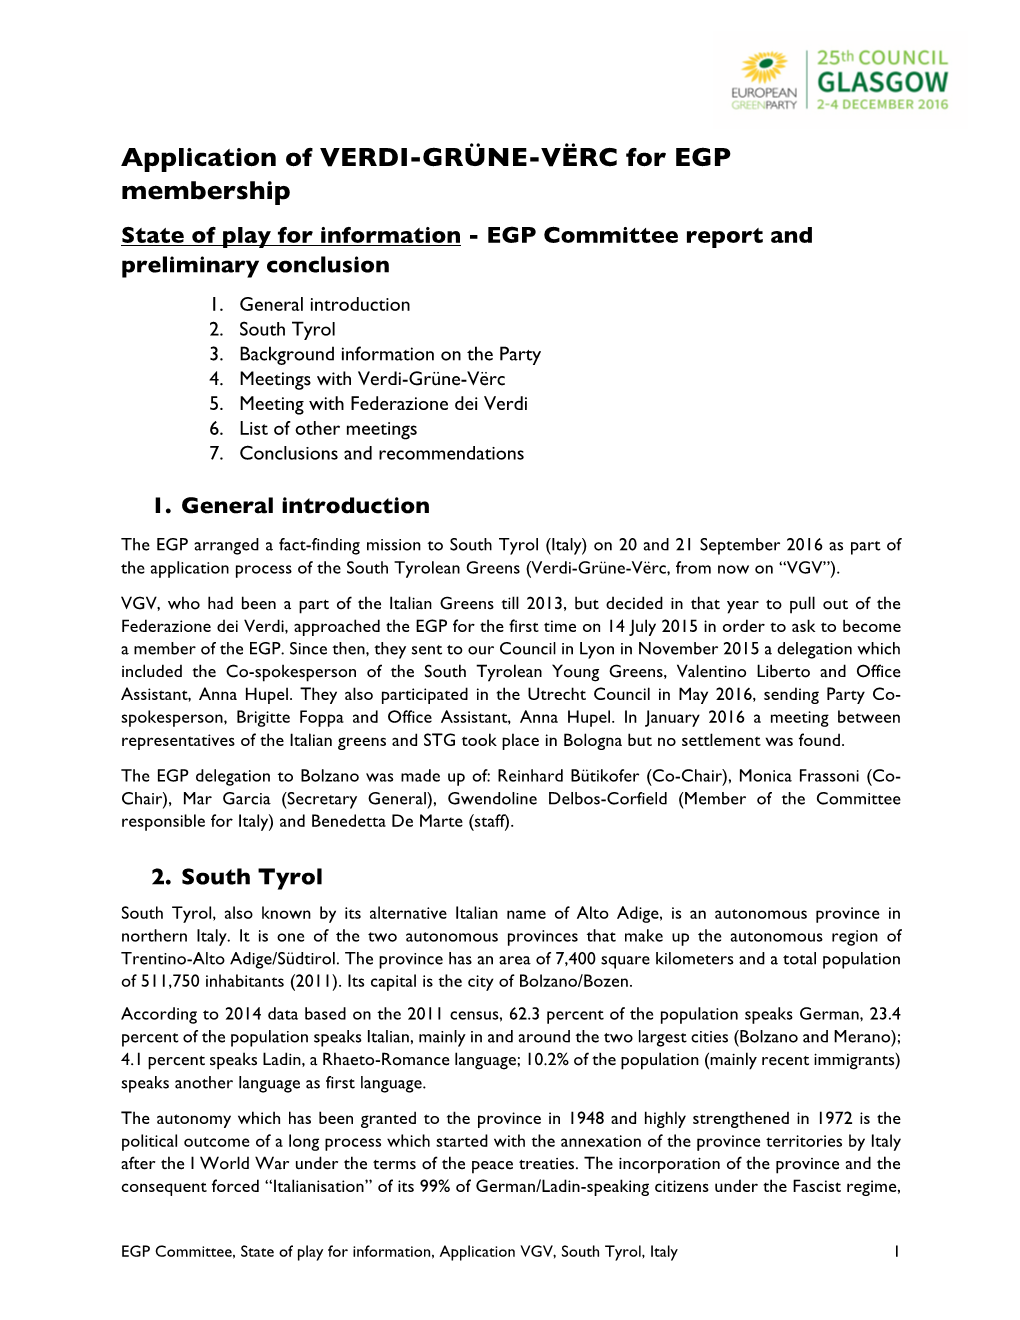 Application of VERDI-GRÜNE-VËRC for EGP Membership State of Play for Information - EGP Committee Report and Preliminary Conclusion 1